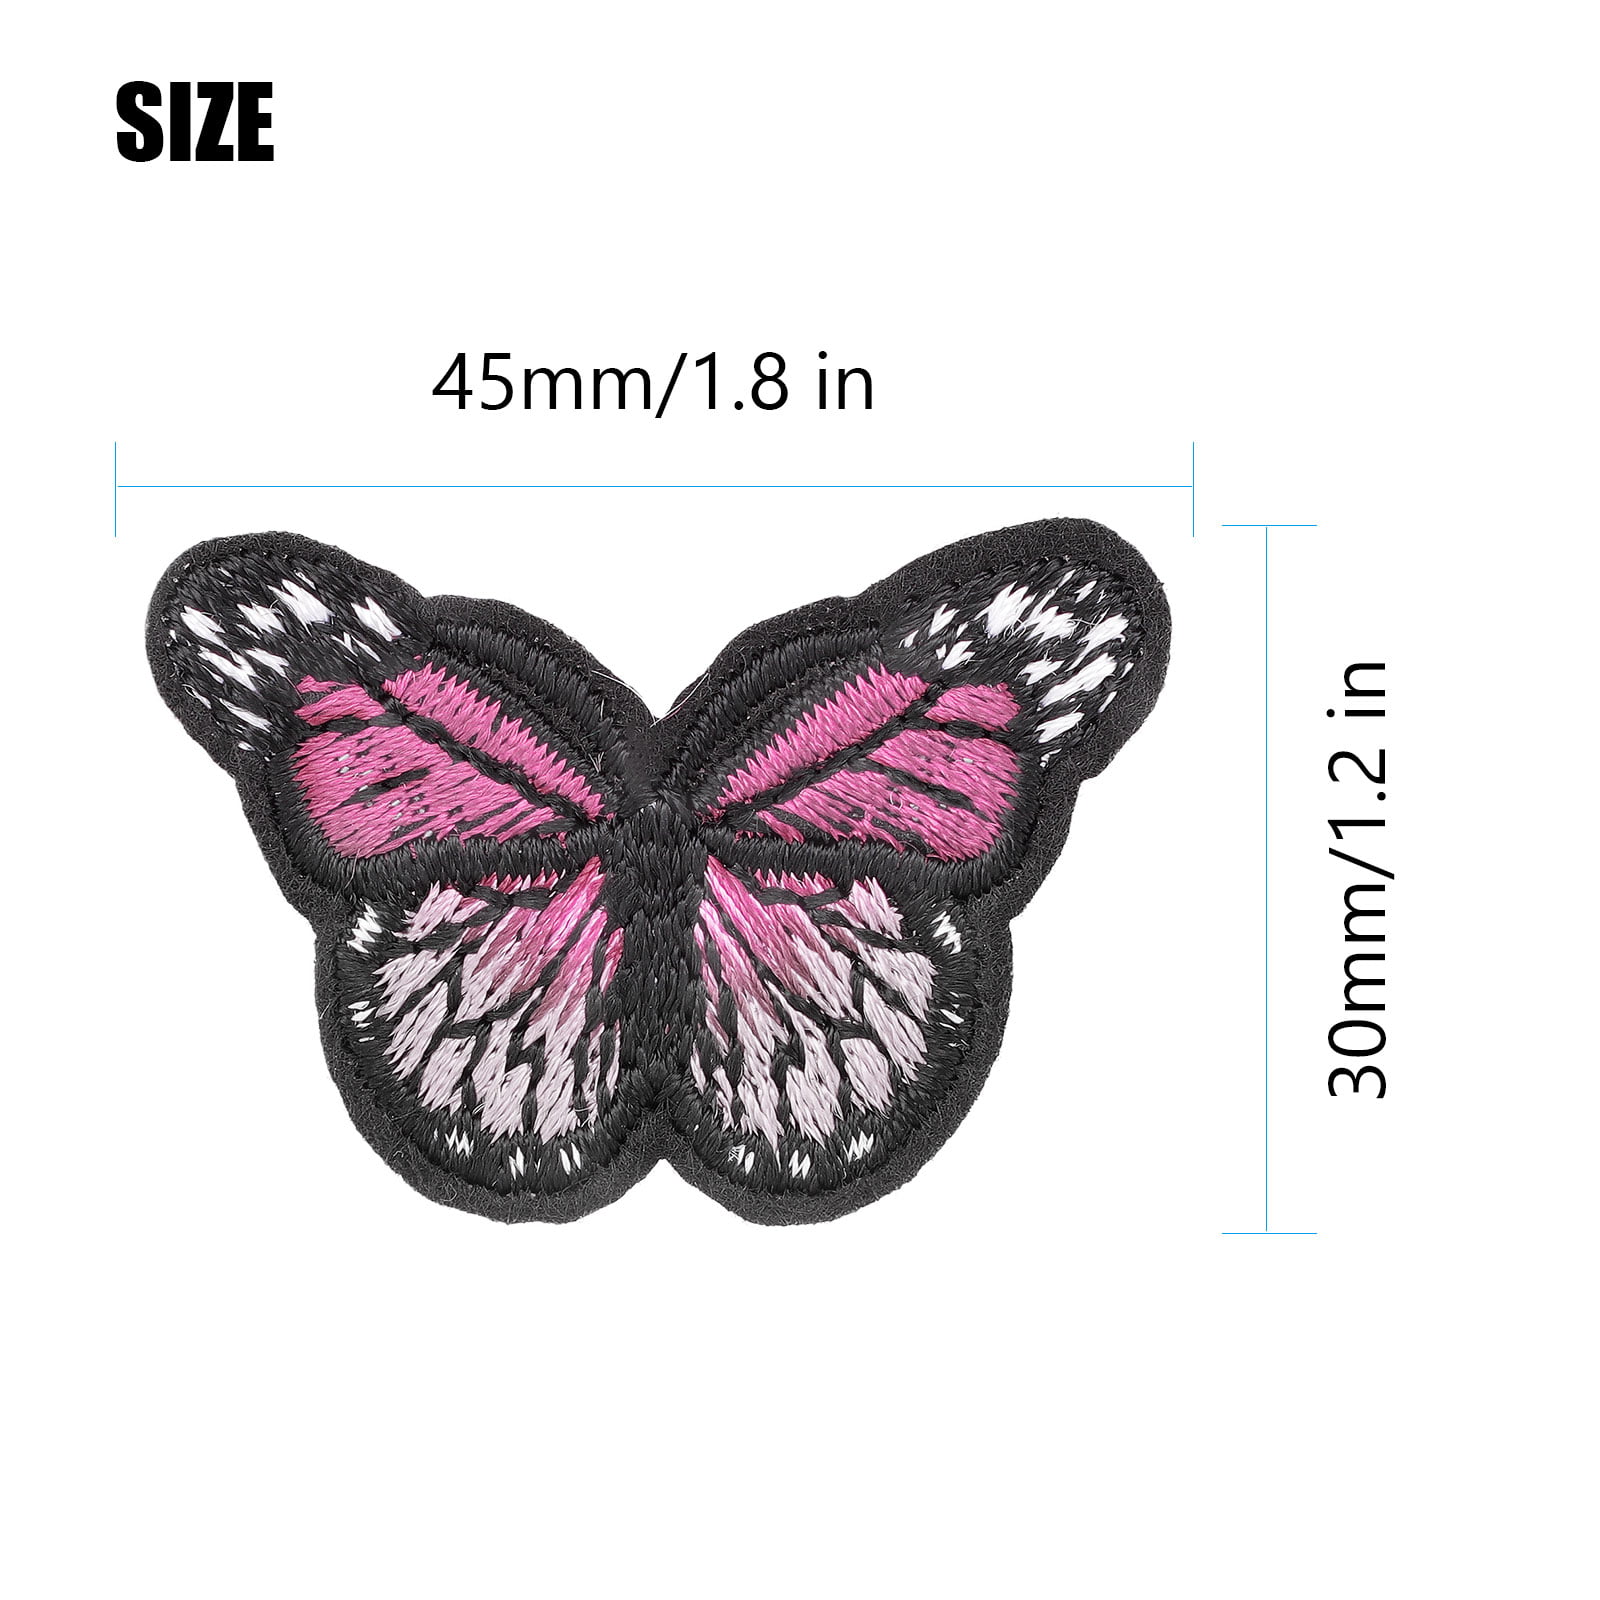 10x Embroidery Butterfly Patch Badge Sew Iron On Fabric Dress Applique Craft HOT